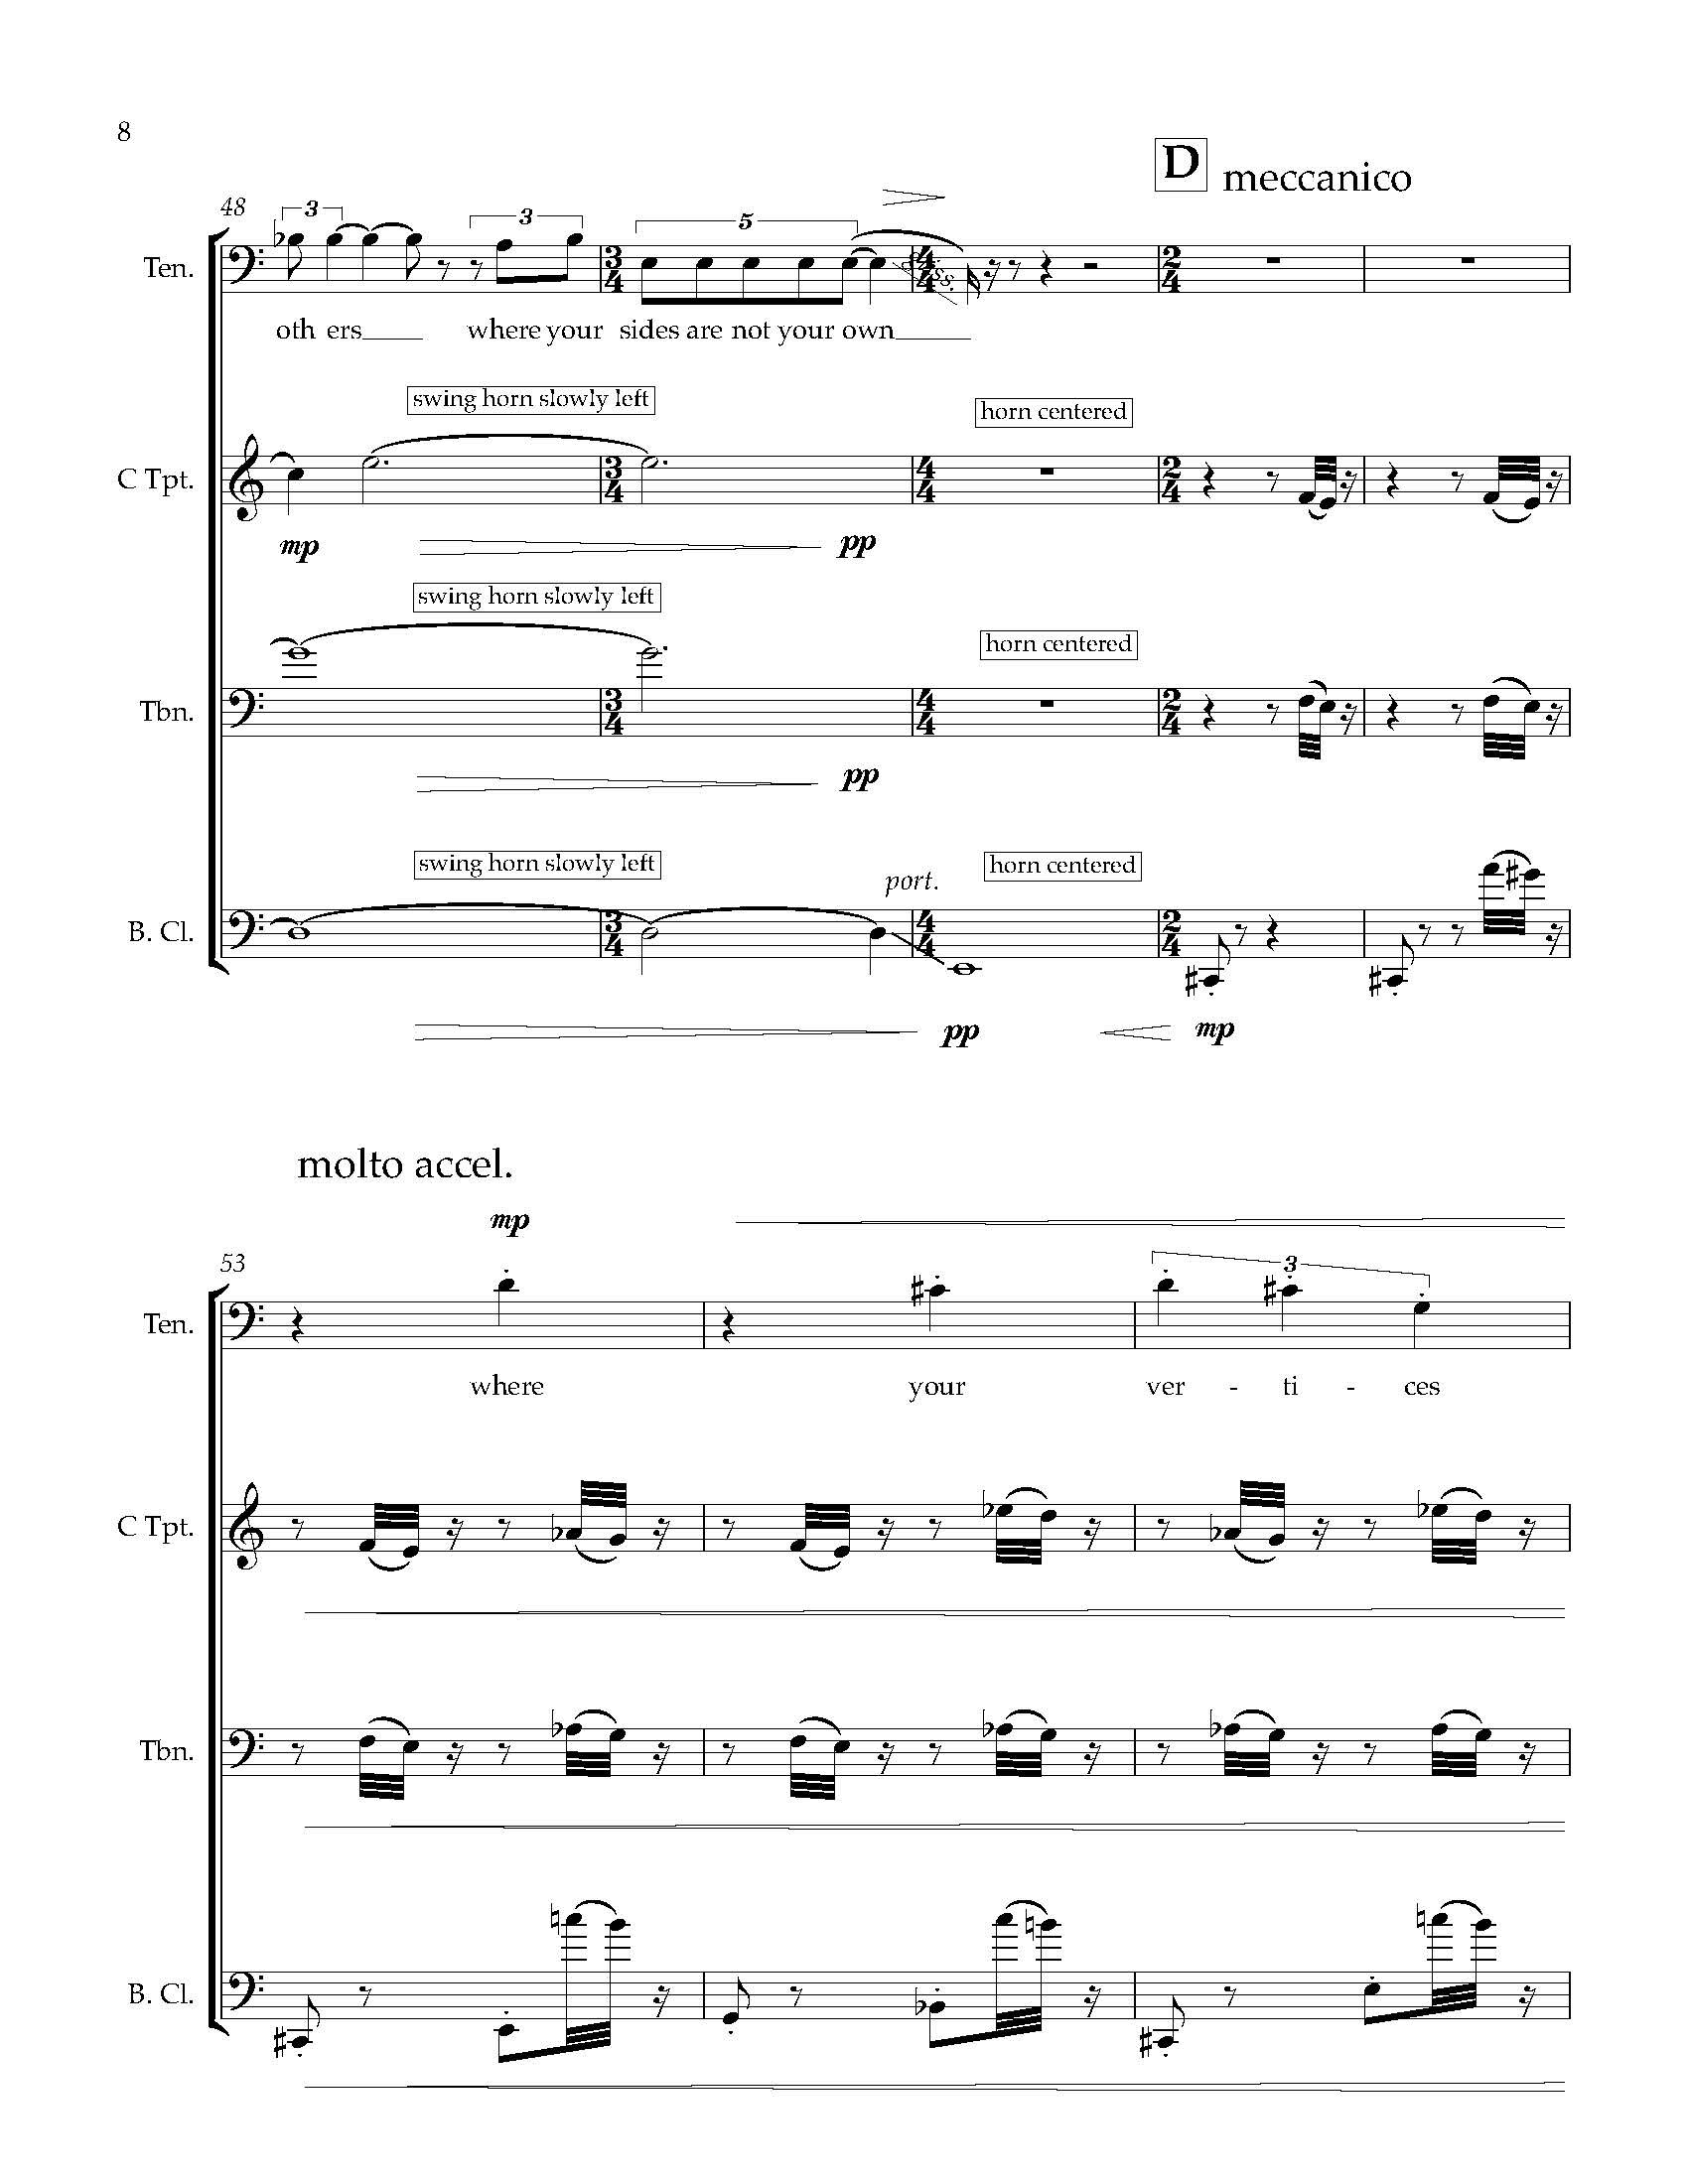 Many Worlds [1] - Complete Score_Page_17.jpg